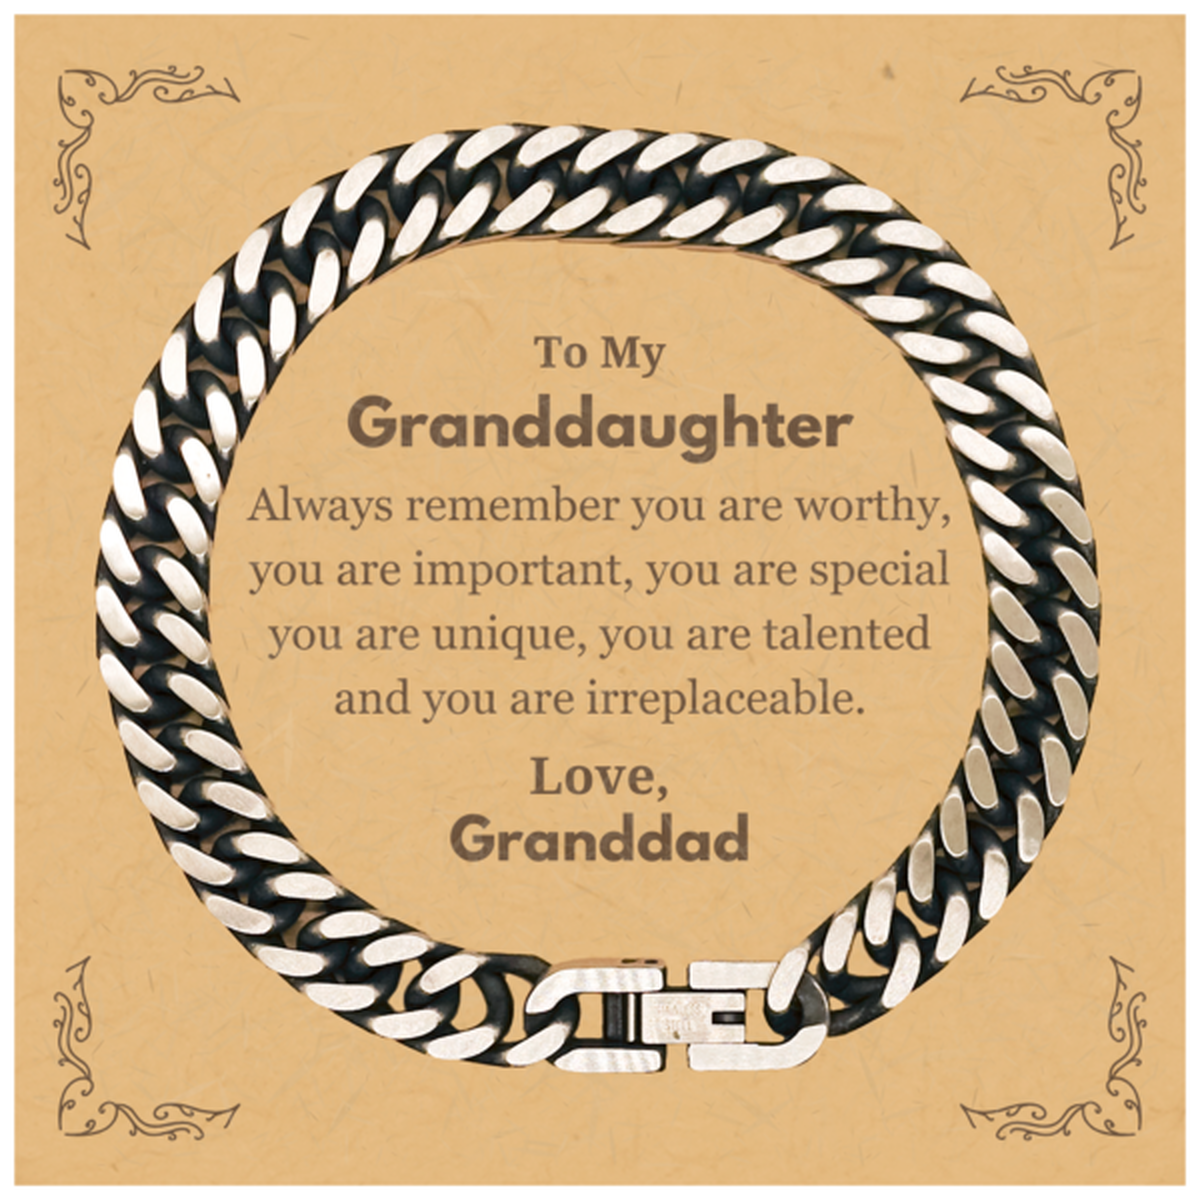 Granddaughter Birthday Gifts from Granddad, Inspirational Cuban Link Chain Bracelet for Granddaughter Christmas Graduation Gifts for Granddaughter Always remember you are worthy, you are important. Love, Granddad